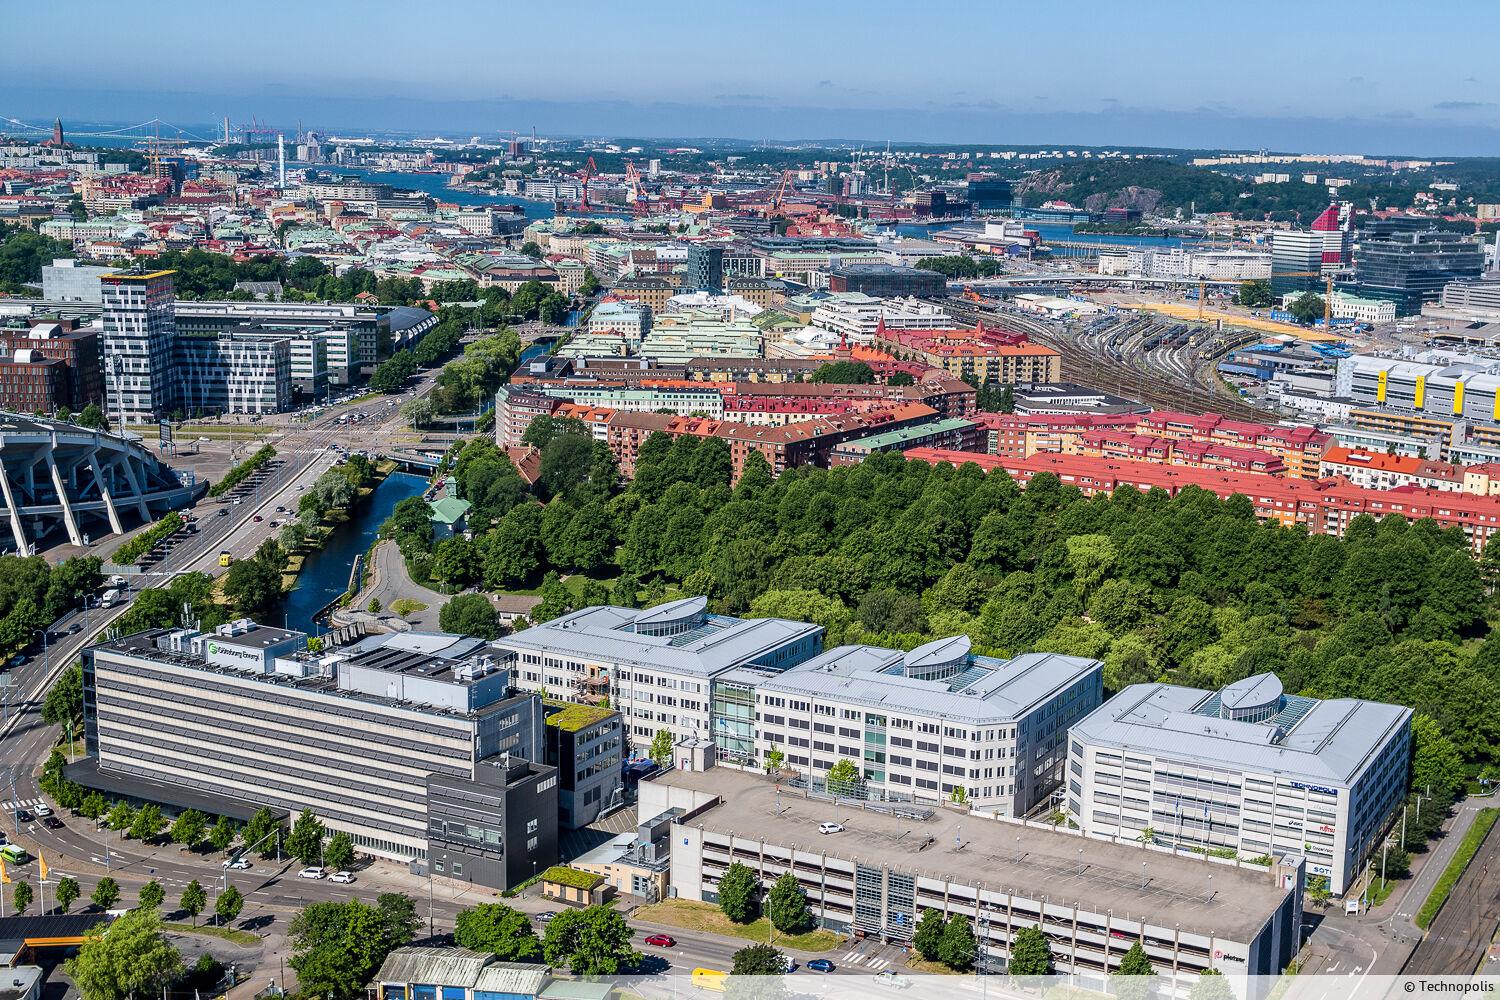 Spacious and bright office space on the 4th floor of Ullevi Campus, building D. The high ceilings and panorama windows create a pleasant office environment.